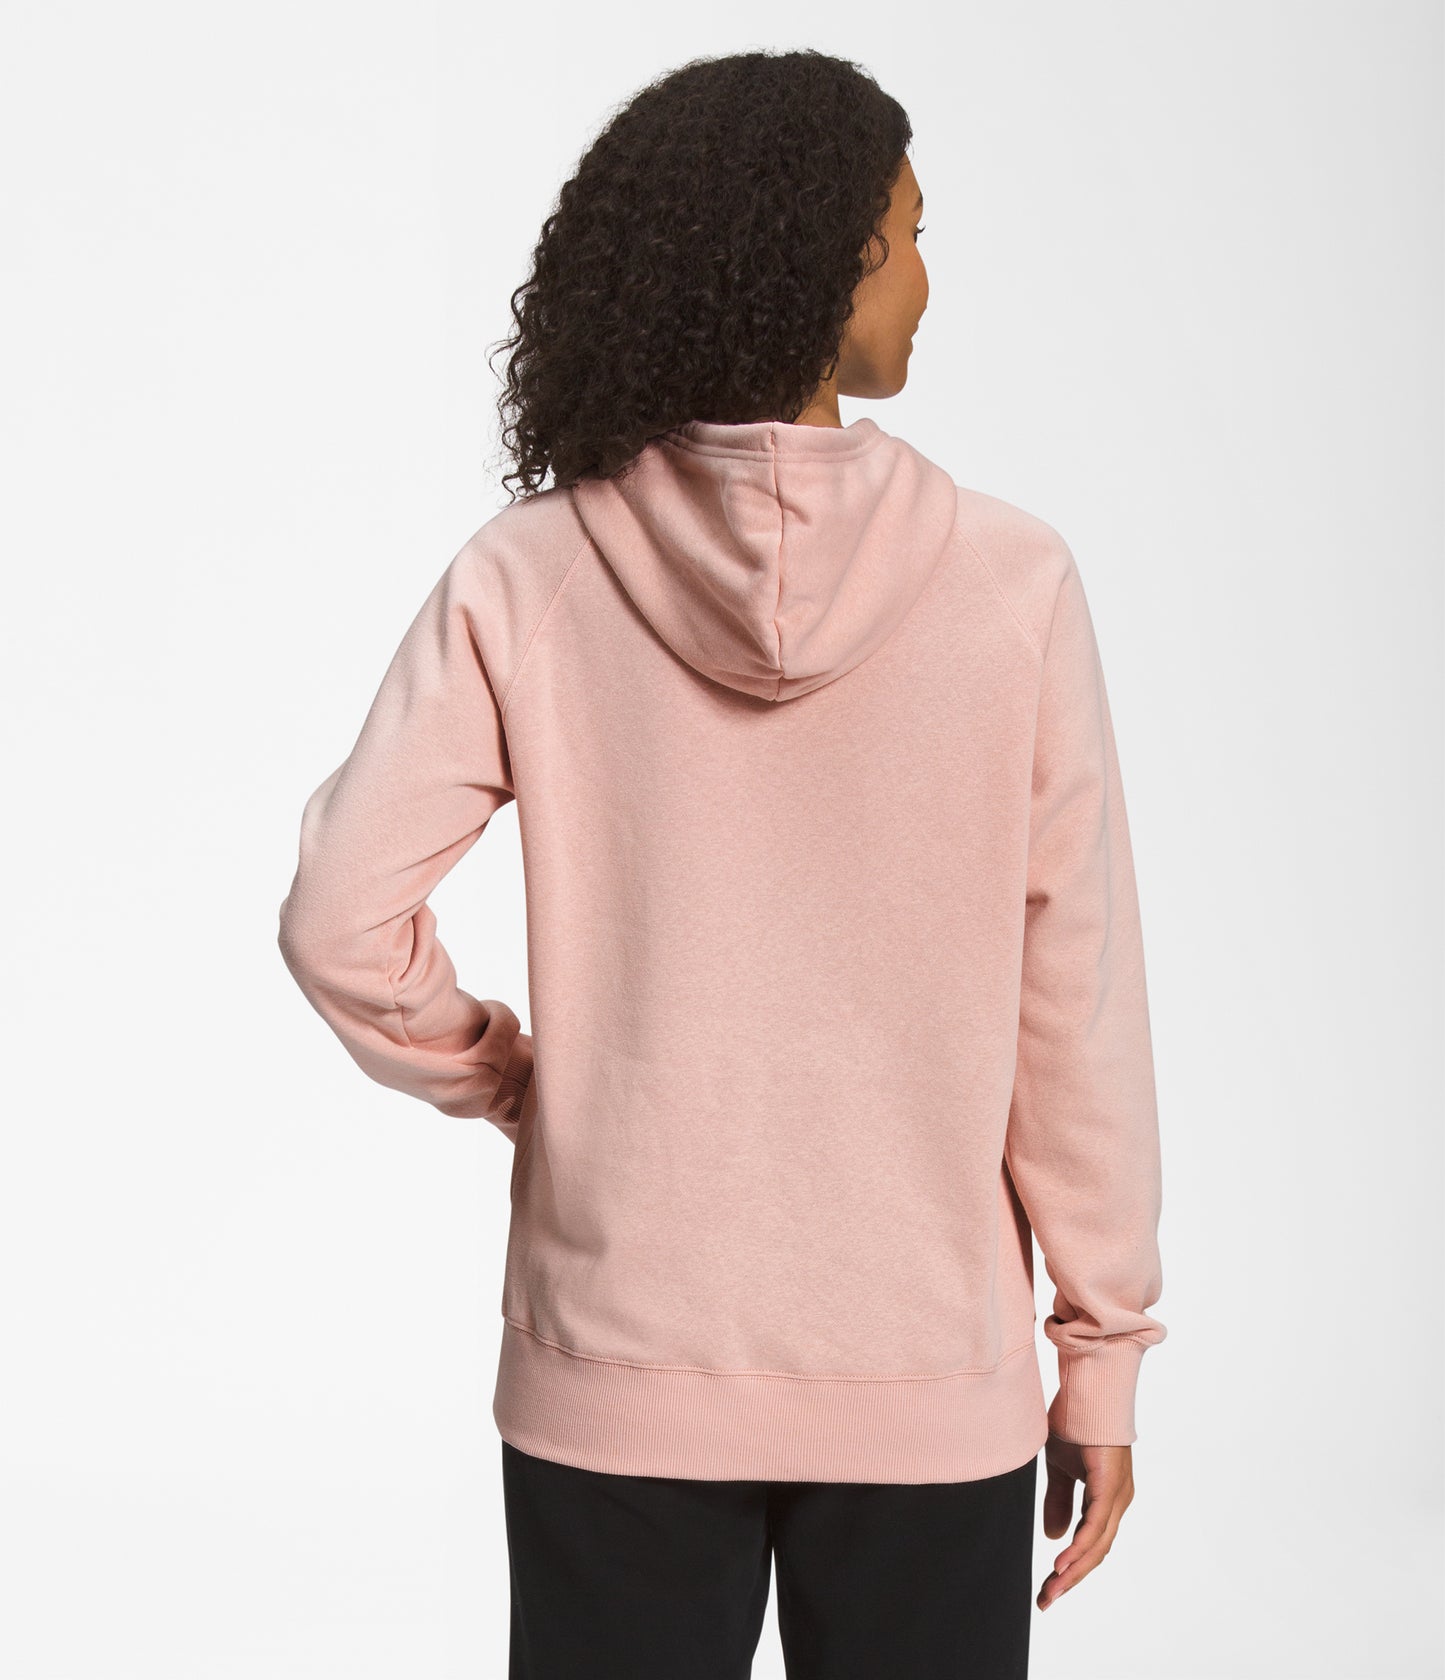 The North Face Women's Half Dome Pullover Hoodie | Assorted